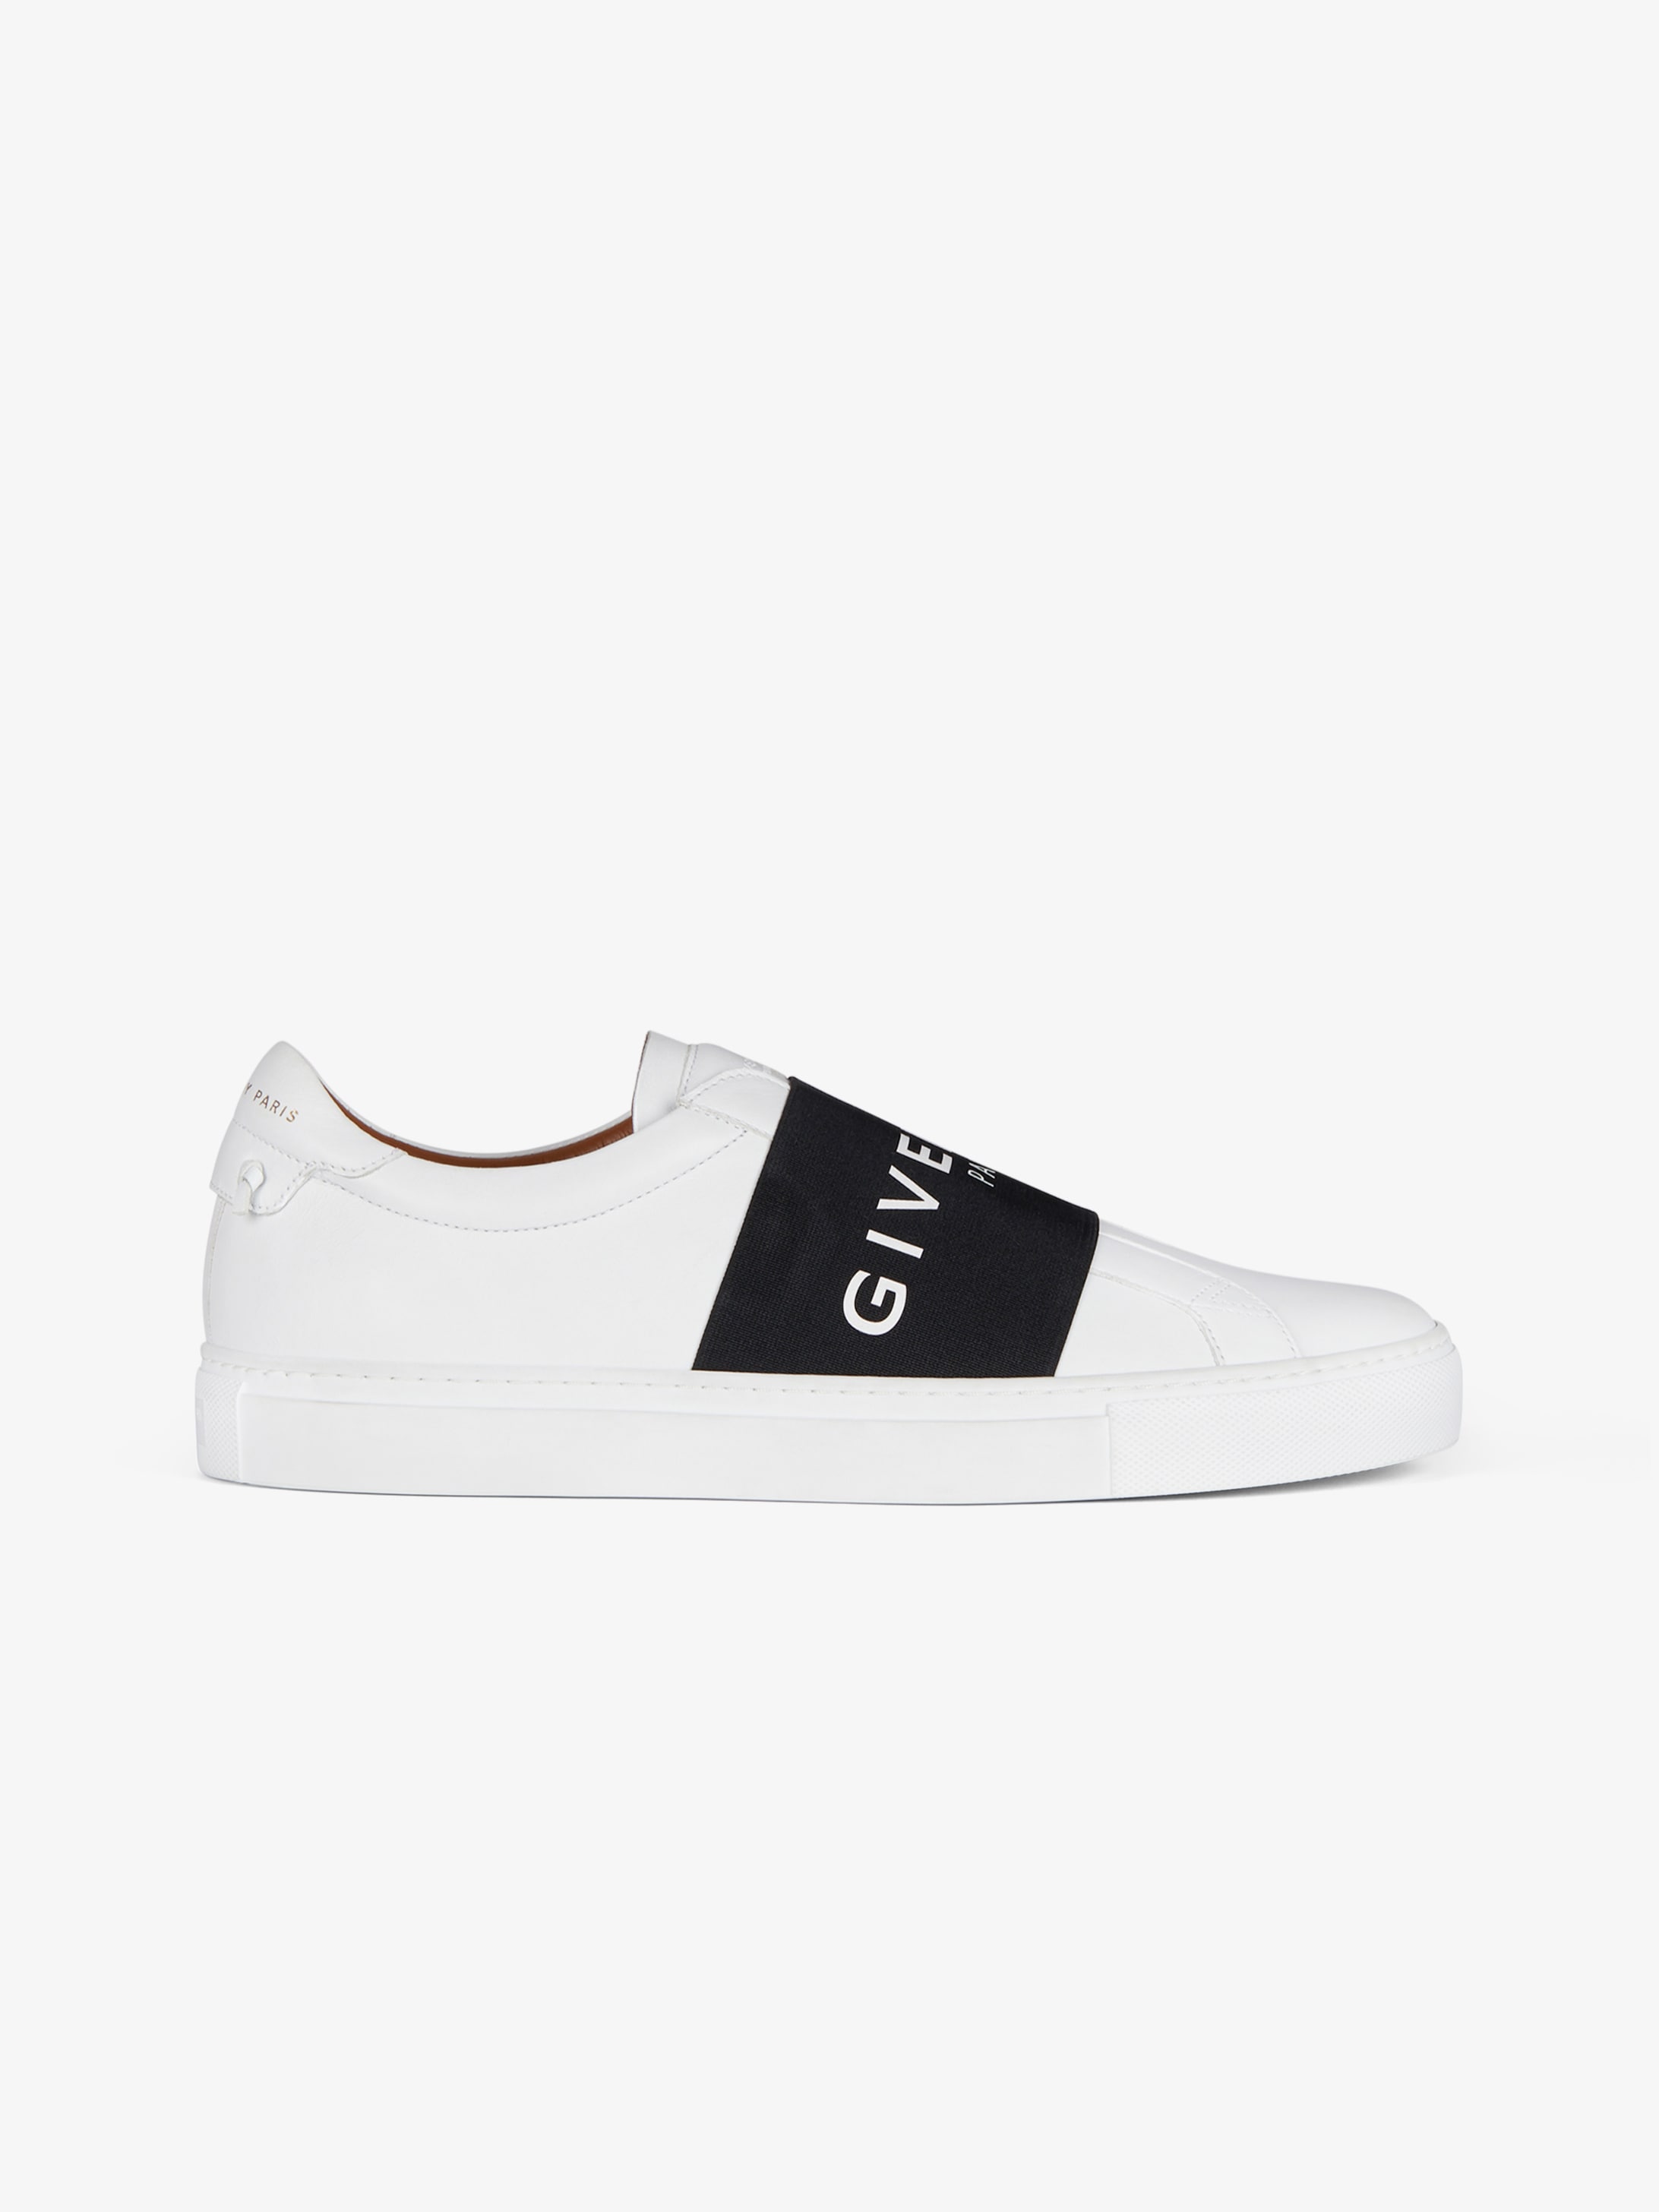 all black givenchy sneakers